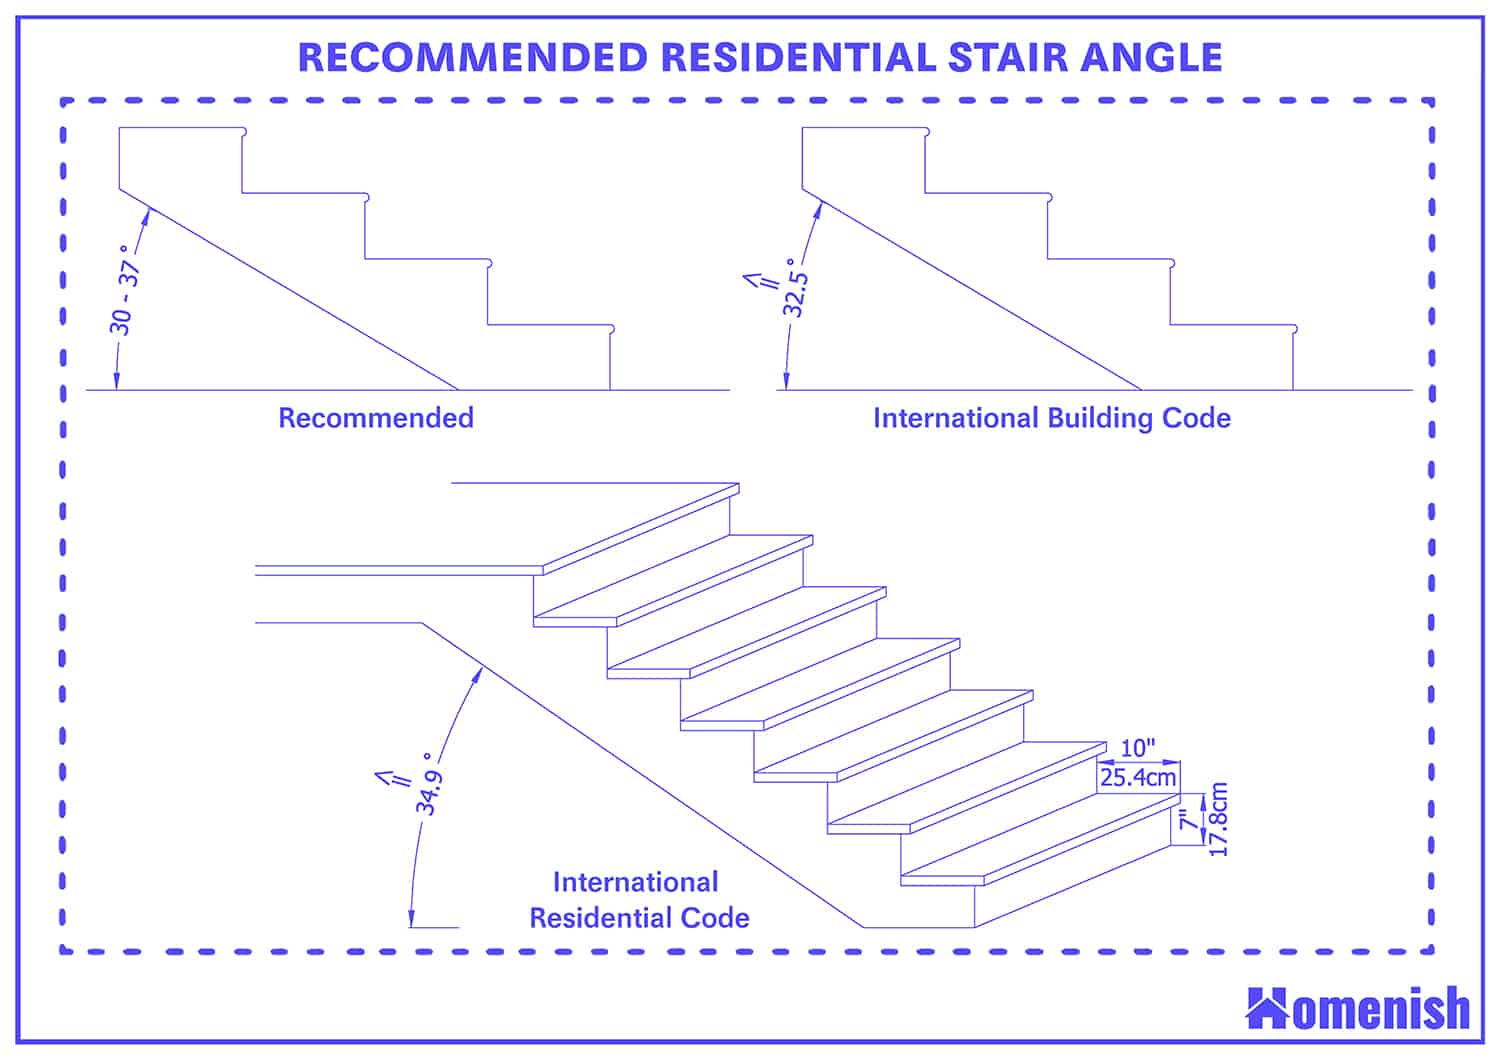 Recommended residential stair angle